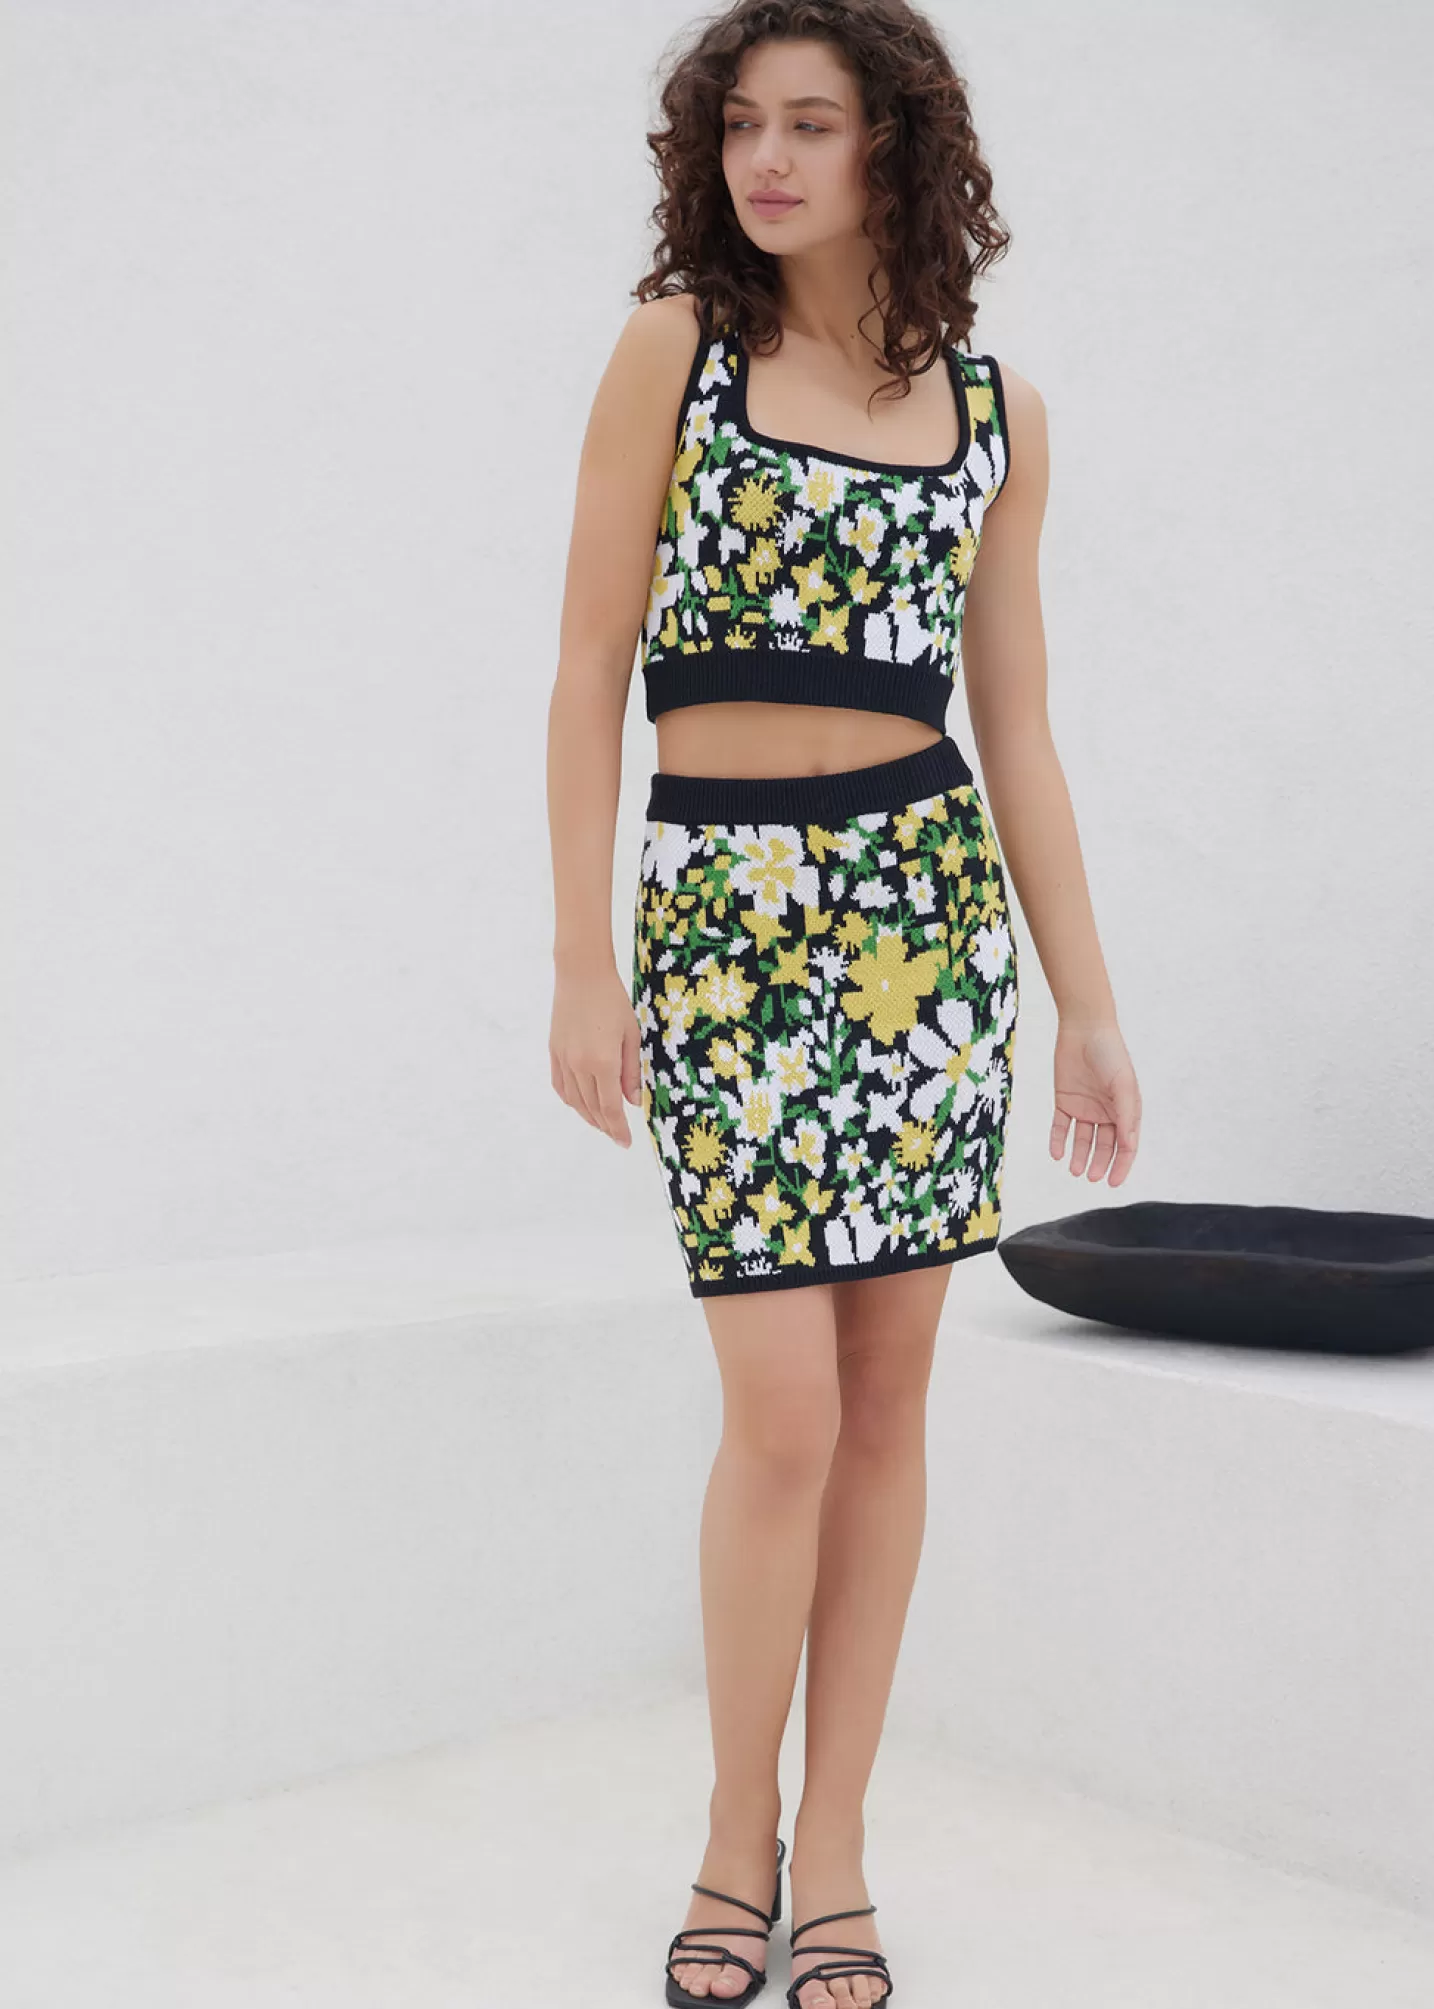 Lost + Wander Skirts*Tropical Daydream Mini Skirt BLACK-YELLOW-FLORAL